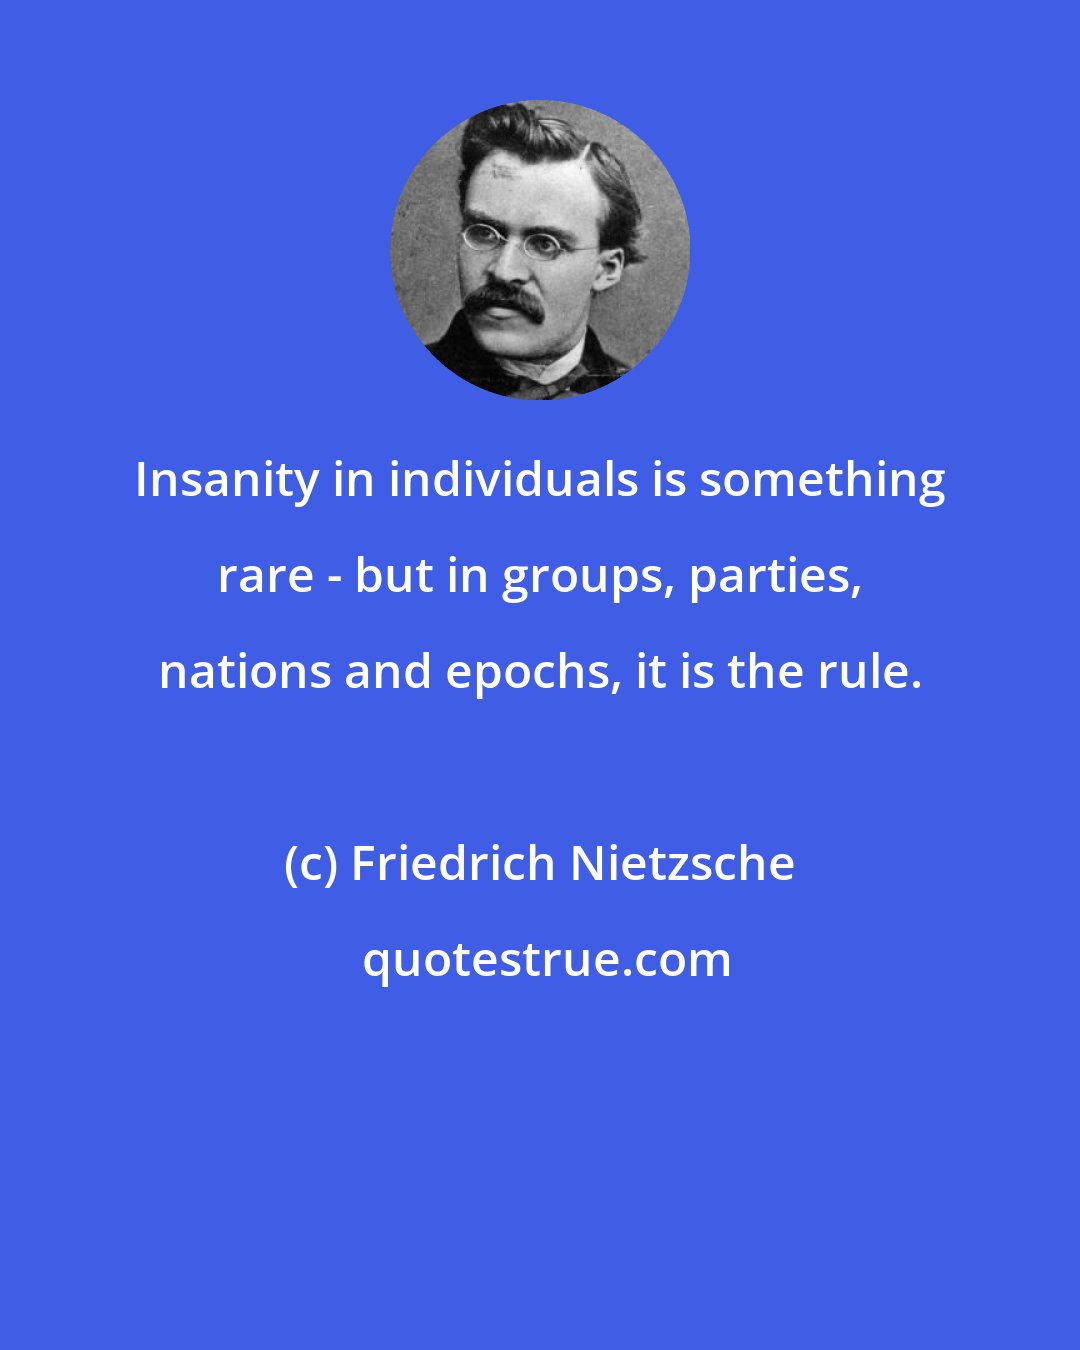 Friedrich Nietzsche: Insanity in individuals is something rare - but in groups, parties, nations and epochs, it is the rule.